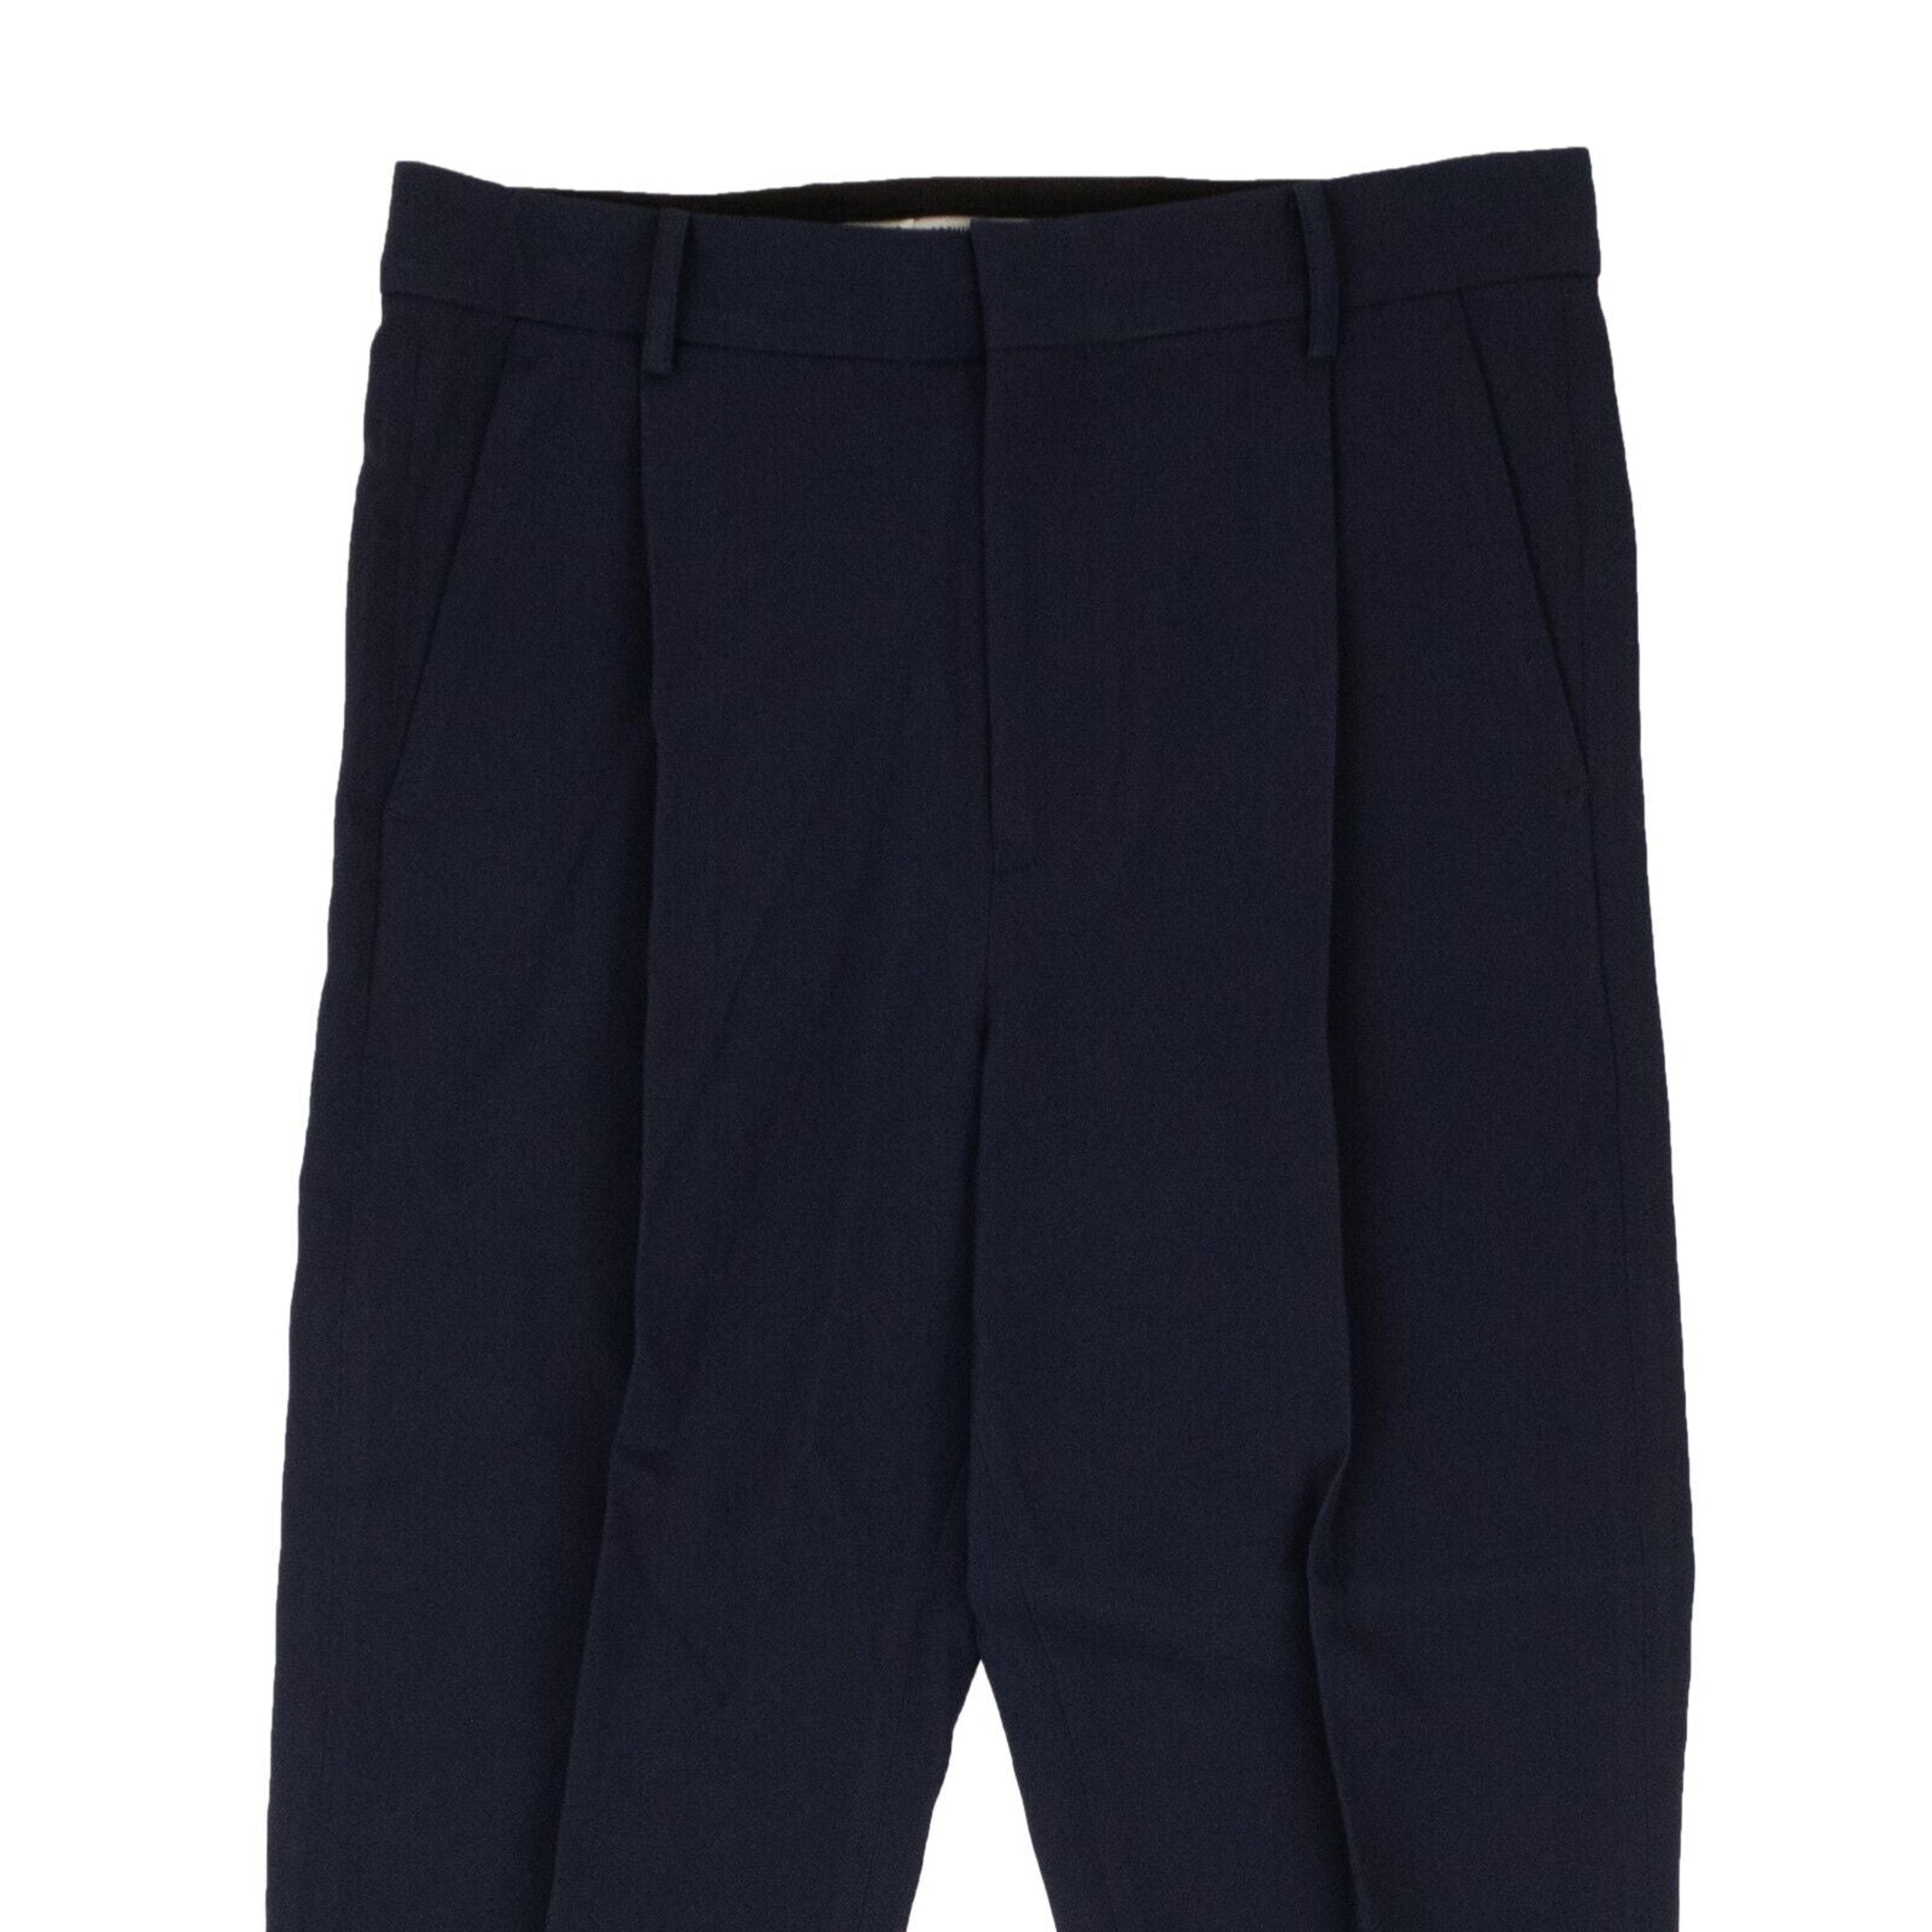 Alternate View 1 of Opening Ceremony Twill Trouser - Navy